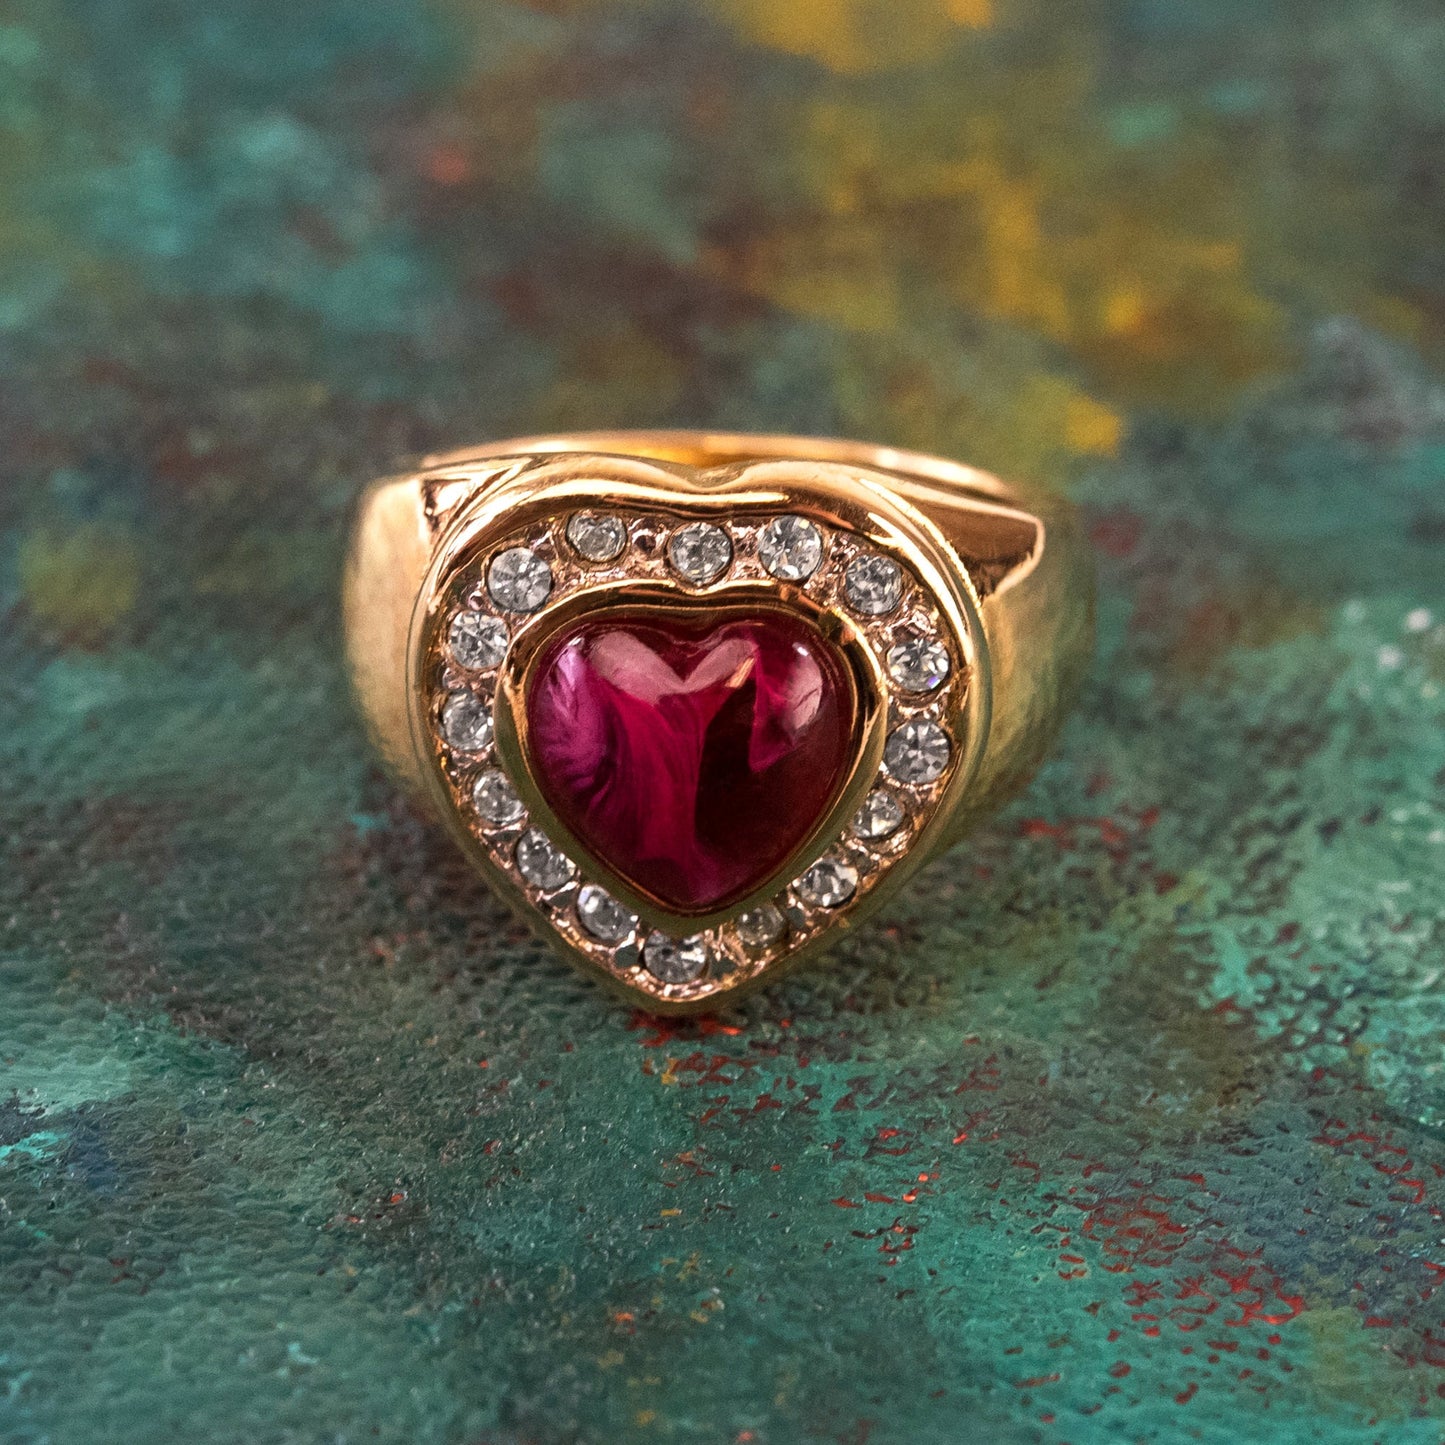 Vintage Ring Red and Clear Swarovski Crystals Heart Ring 18k Gold Womans Antique R3140